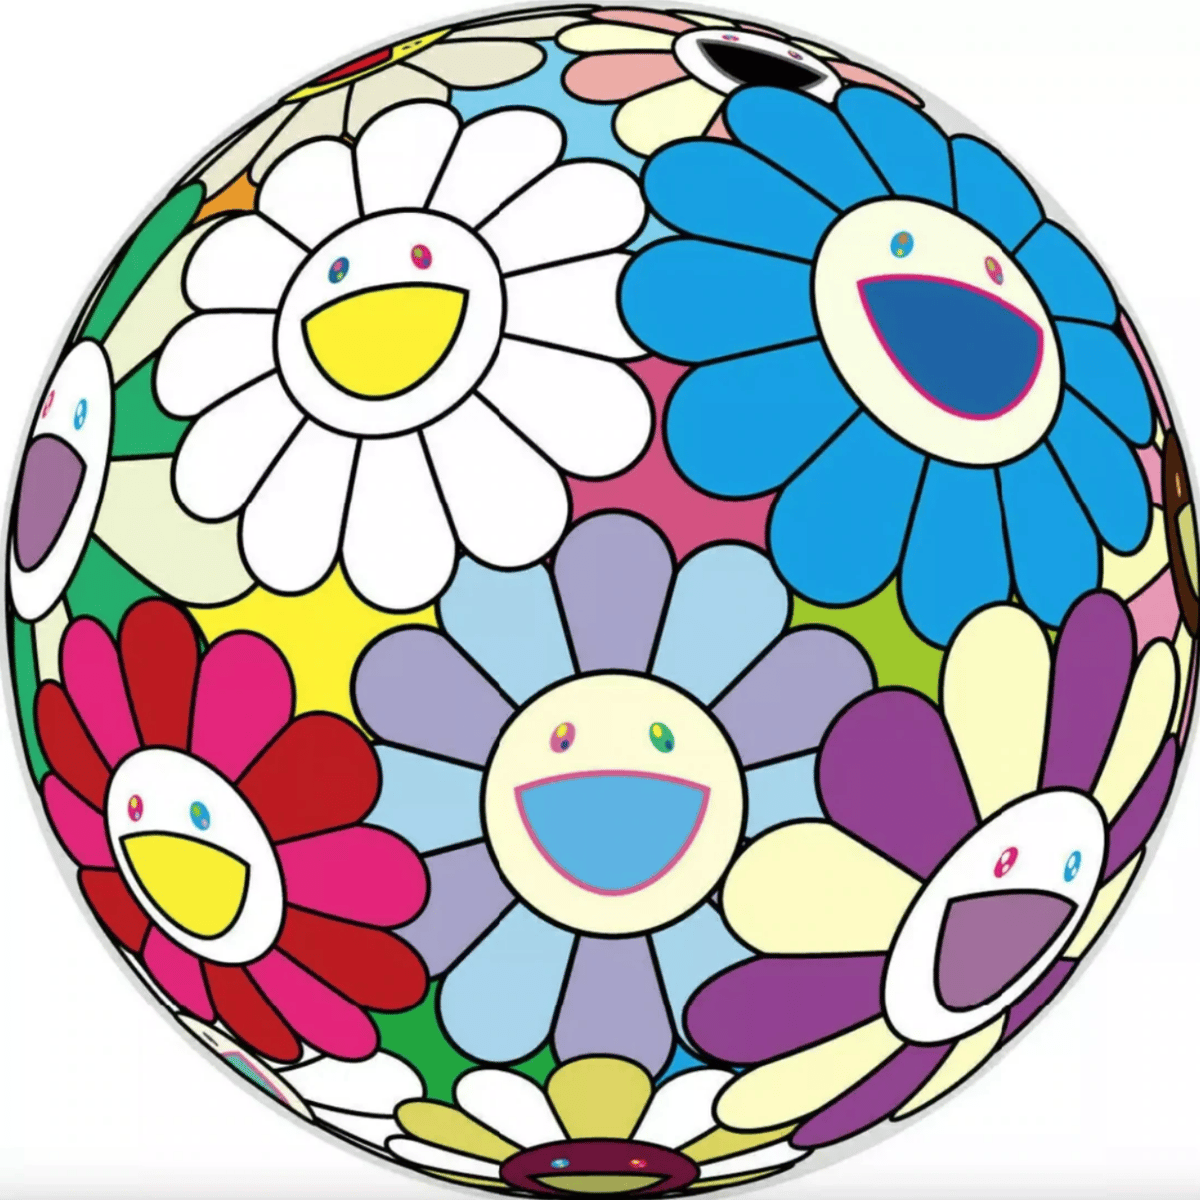 Takashi Murakami - Smiley Days with Ms. Flower to You! for Sale